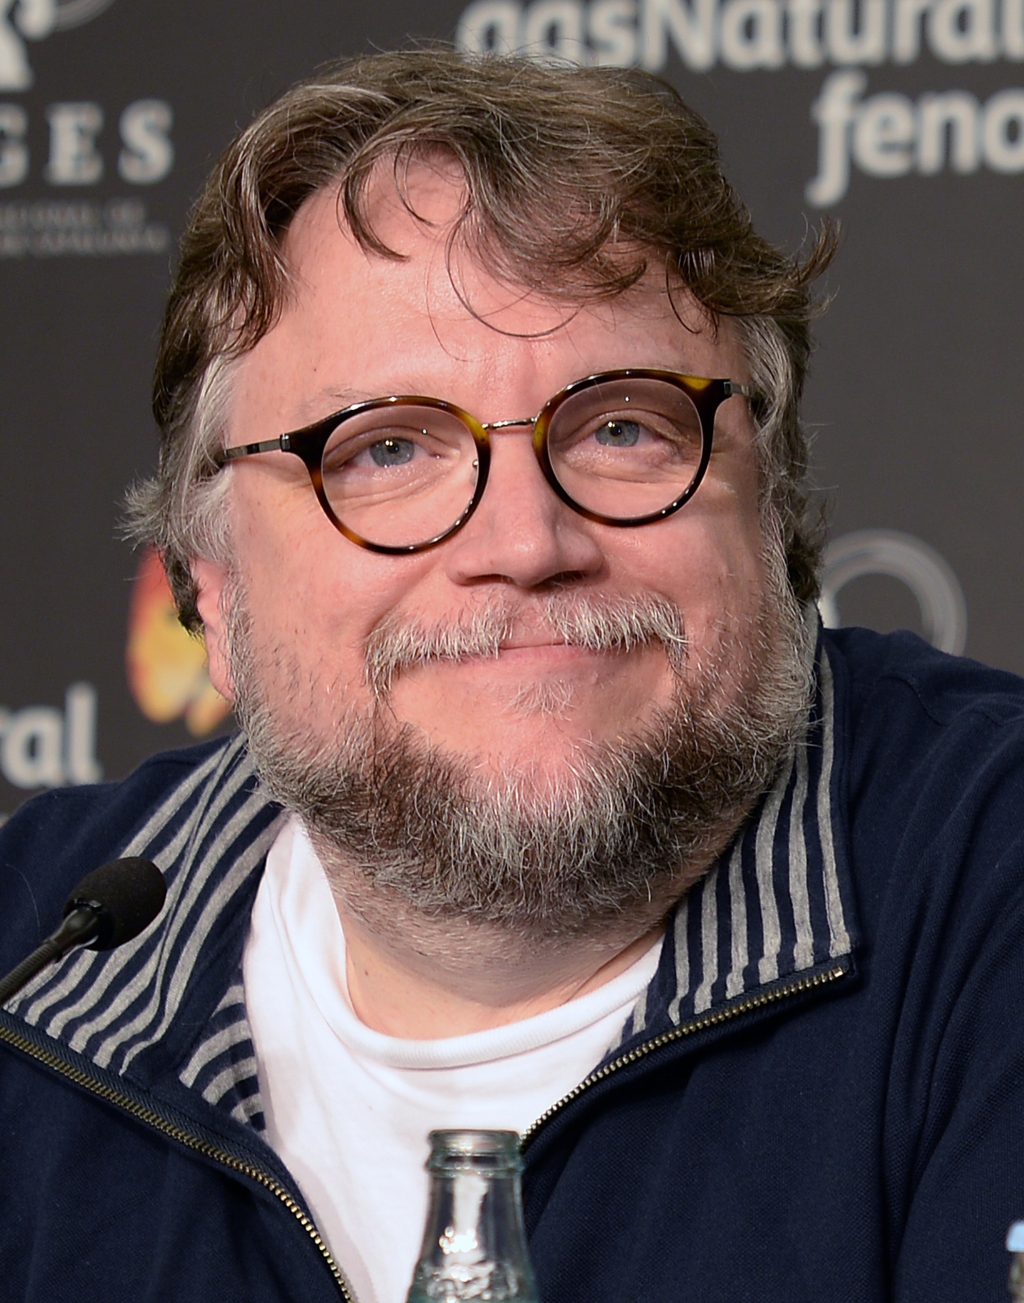 Streaming News: Netflix Presents the teaser trailer for Guillermo Del Toro’s Cabinet of Curiosities – trailer reaction